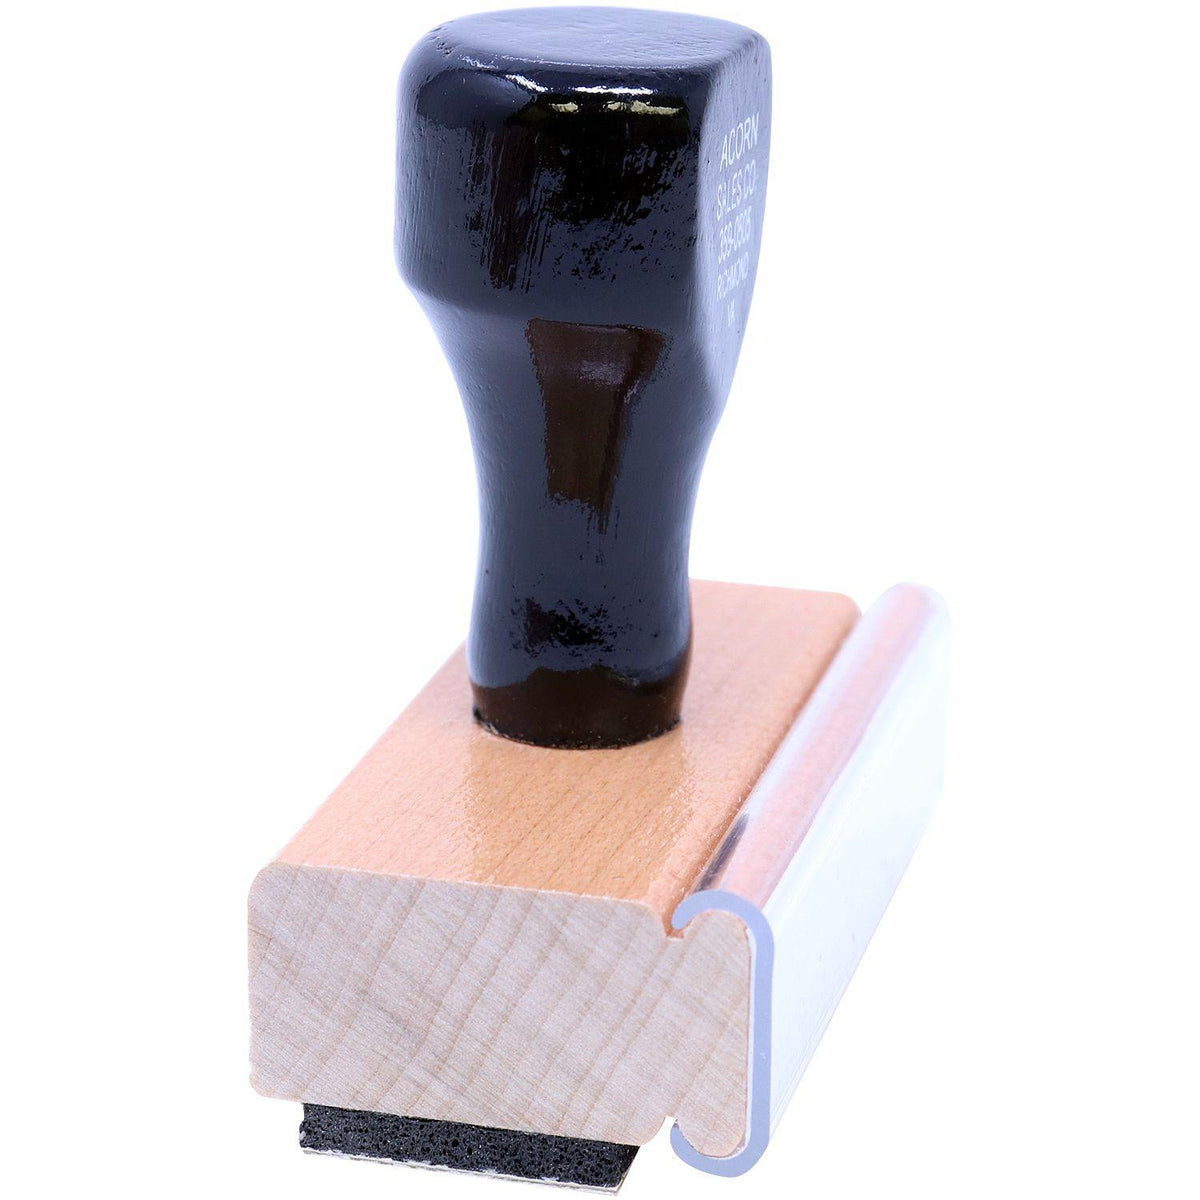 Side View of Duplicate Rubber Stamp at an Angle